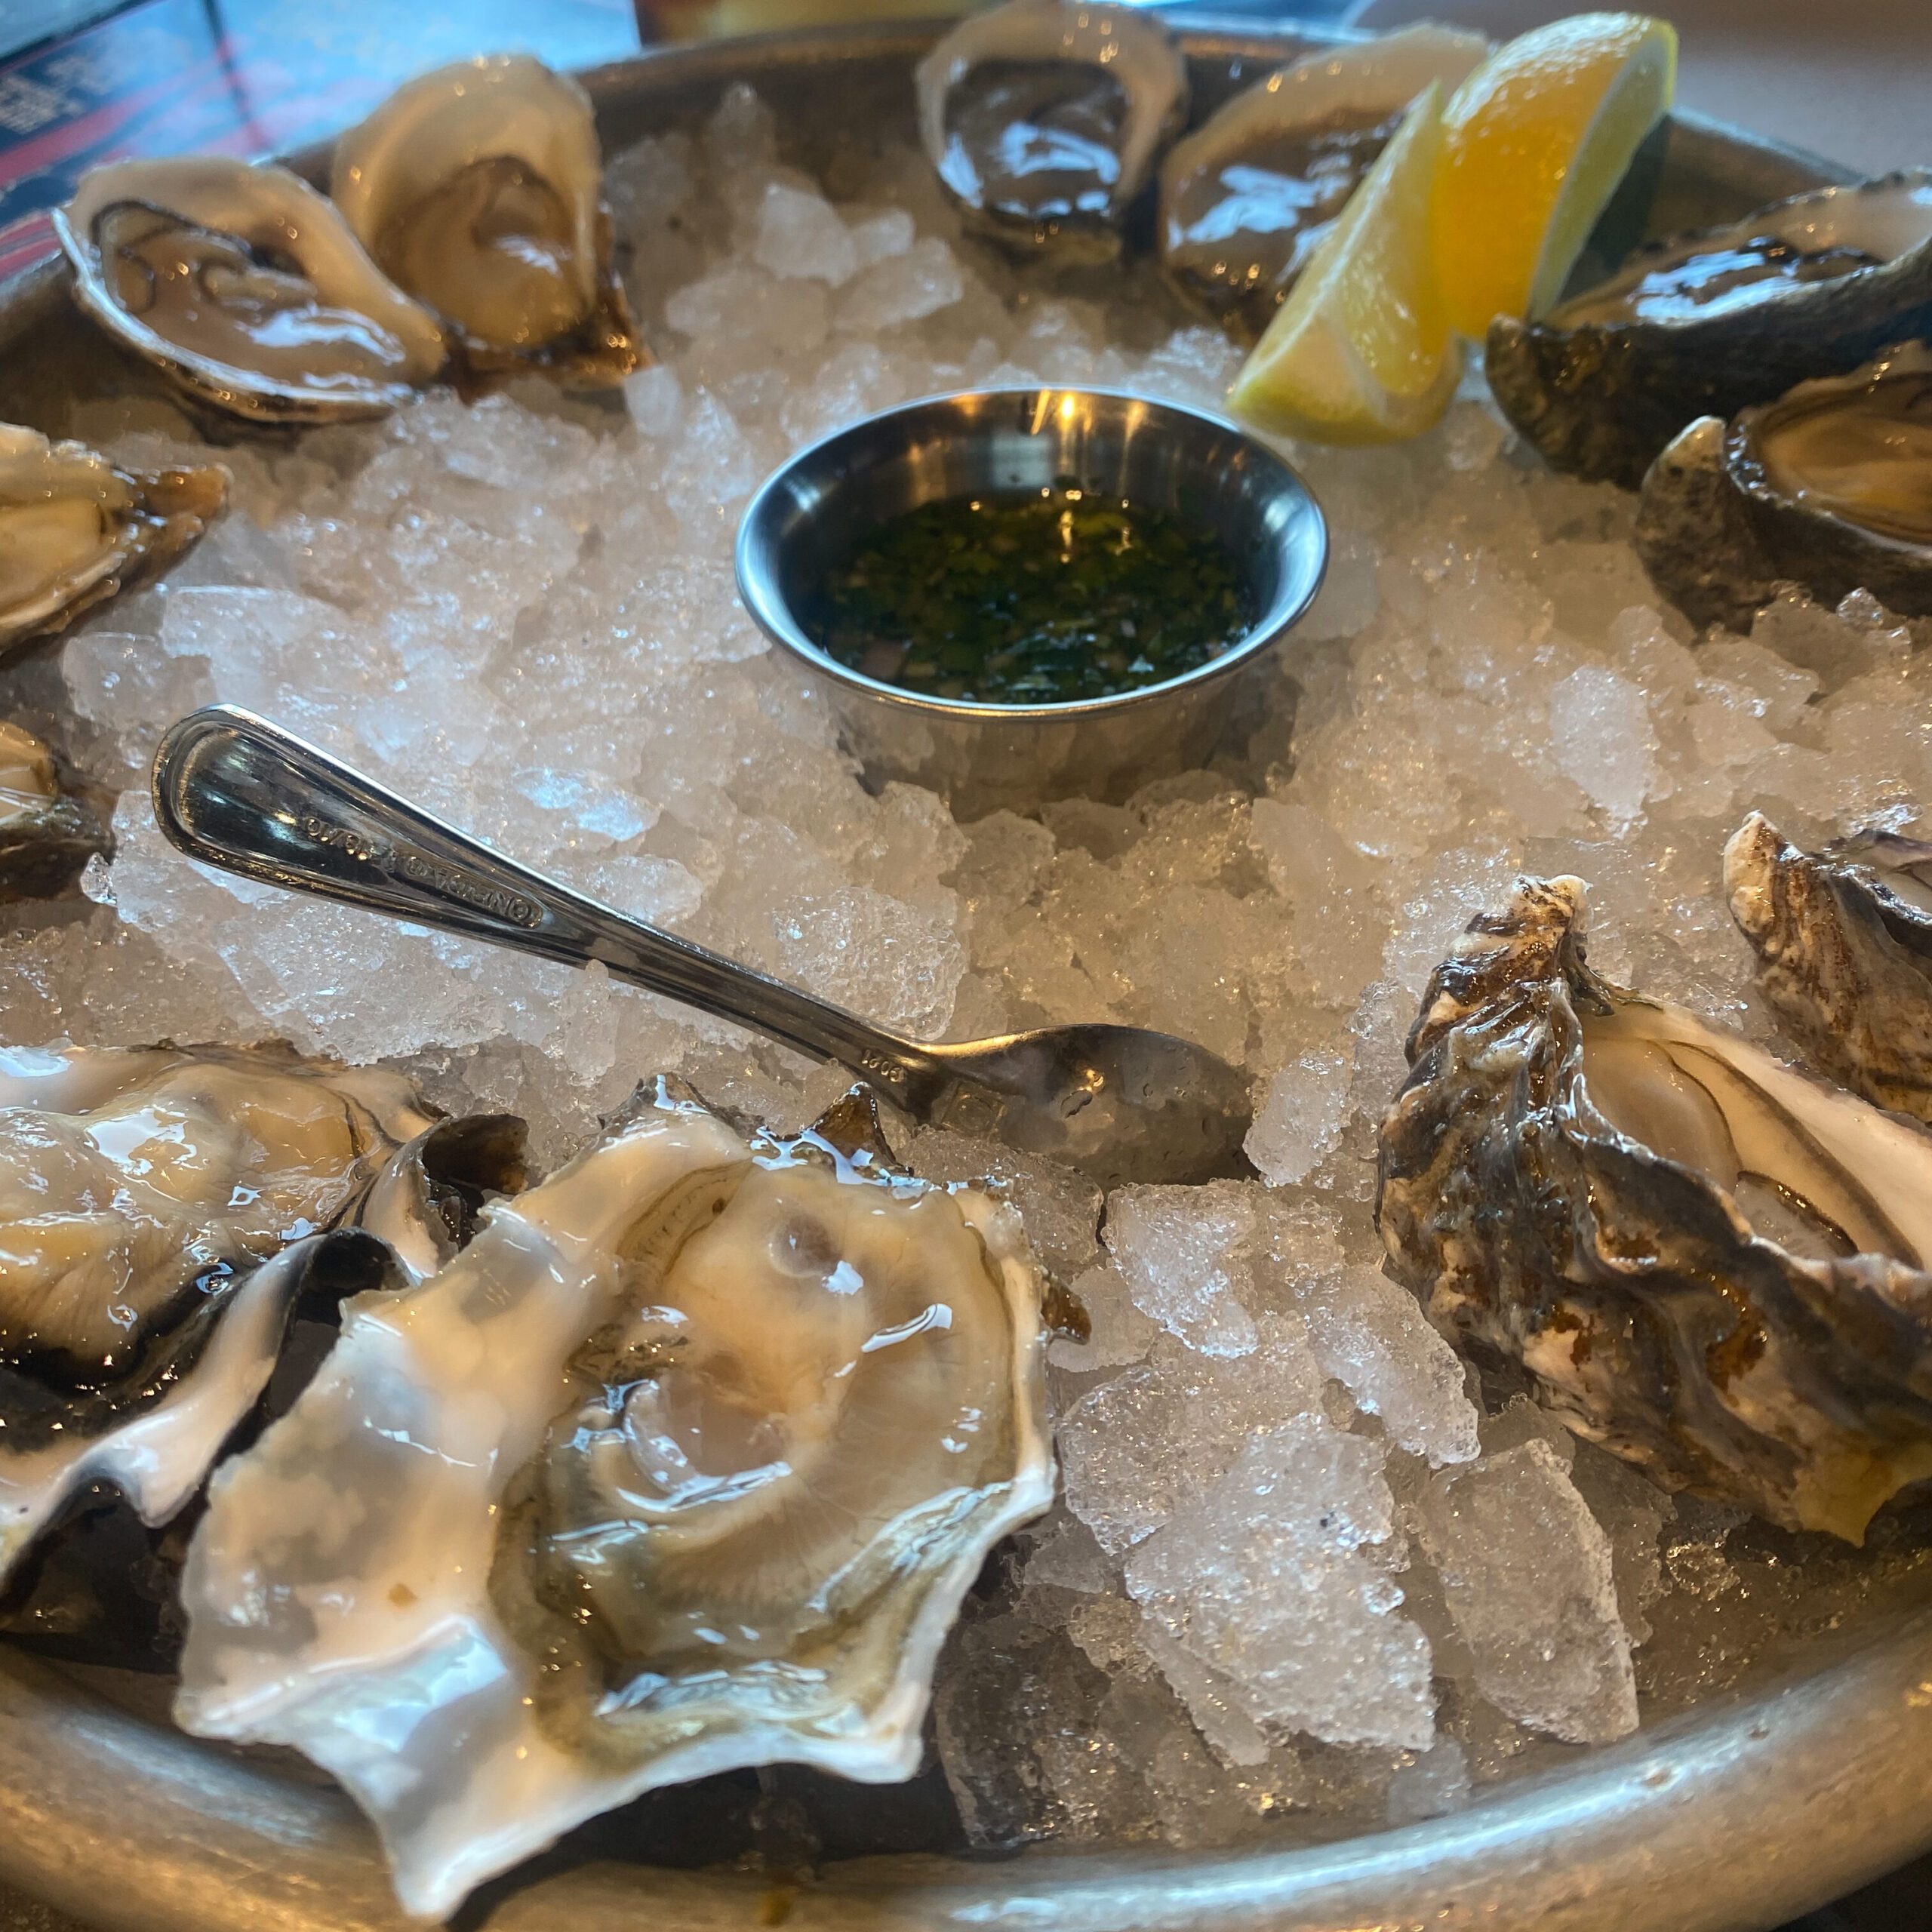 A tray of oysters on a bed of ice with a spoon, lemon wedges, and a serving dish of mignonette in the bed of ice.